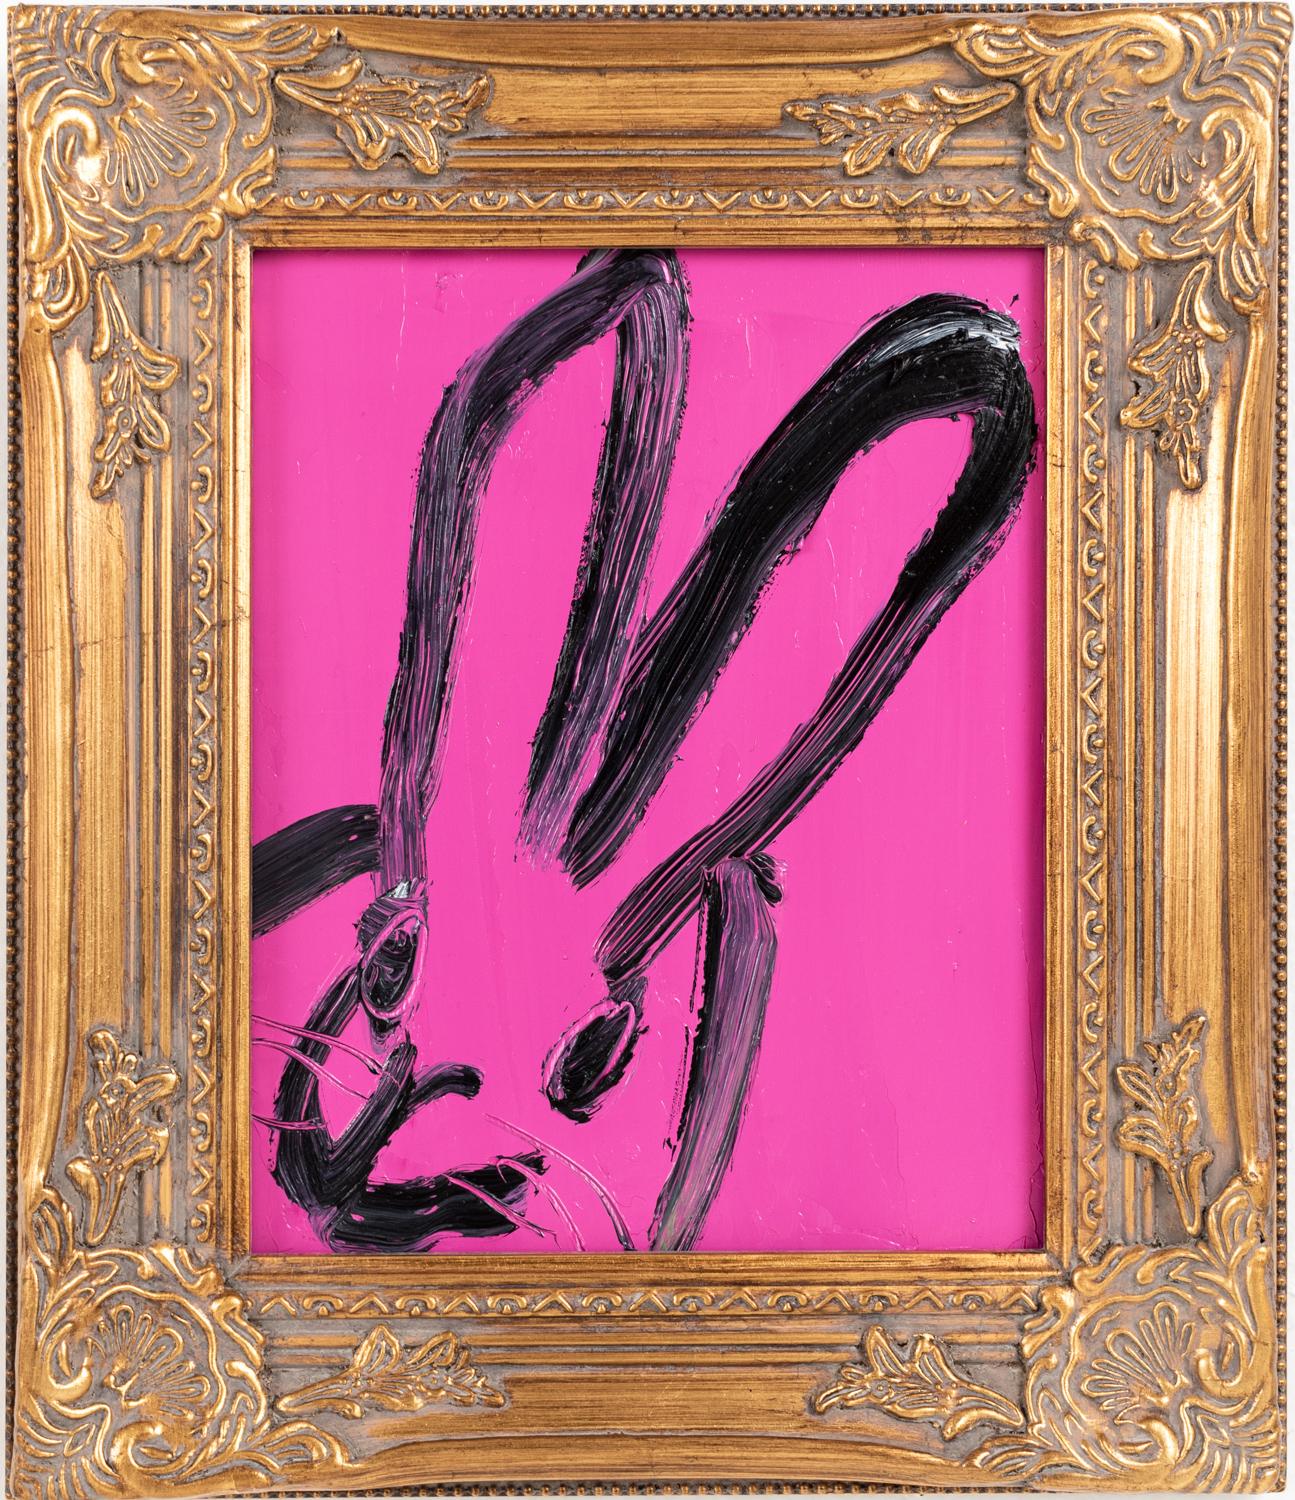 Hunt Slonem Figurative Painting - Purple "Bunny Painting" Original Pink Oil Painting in Gold Vintage Frame